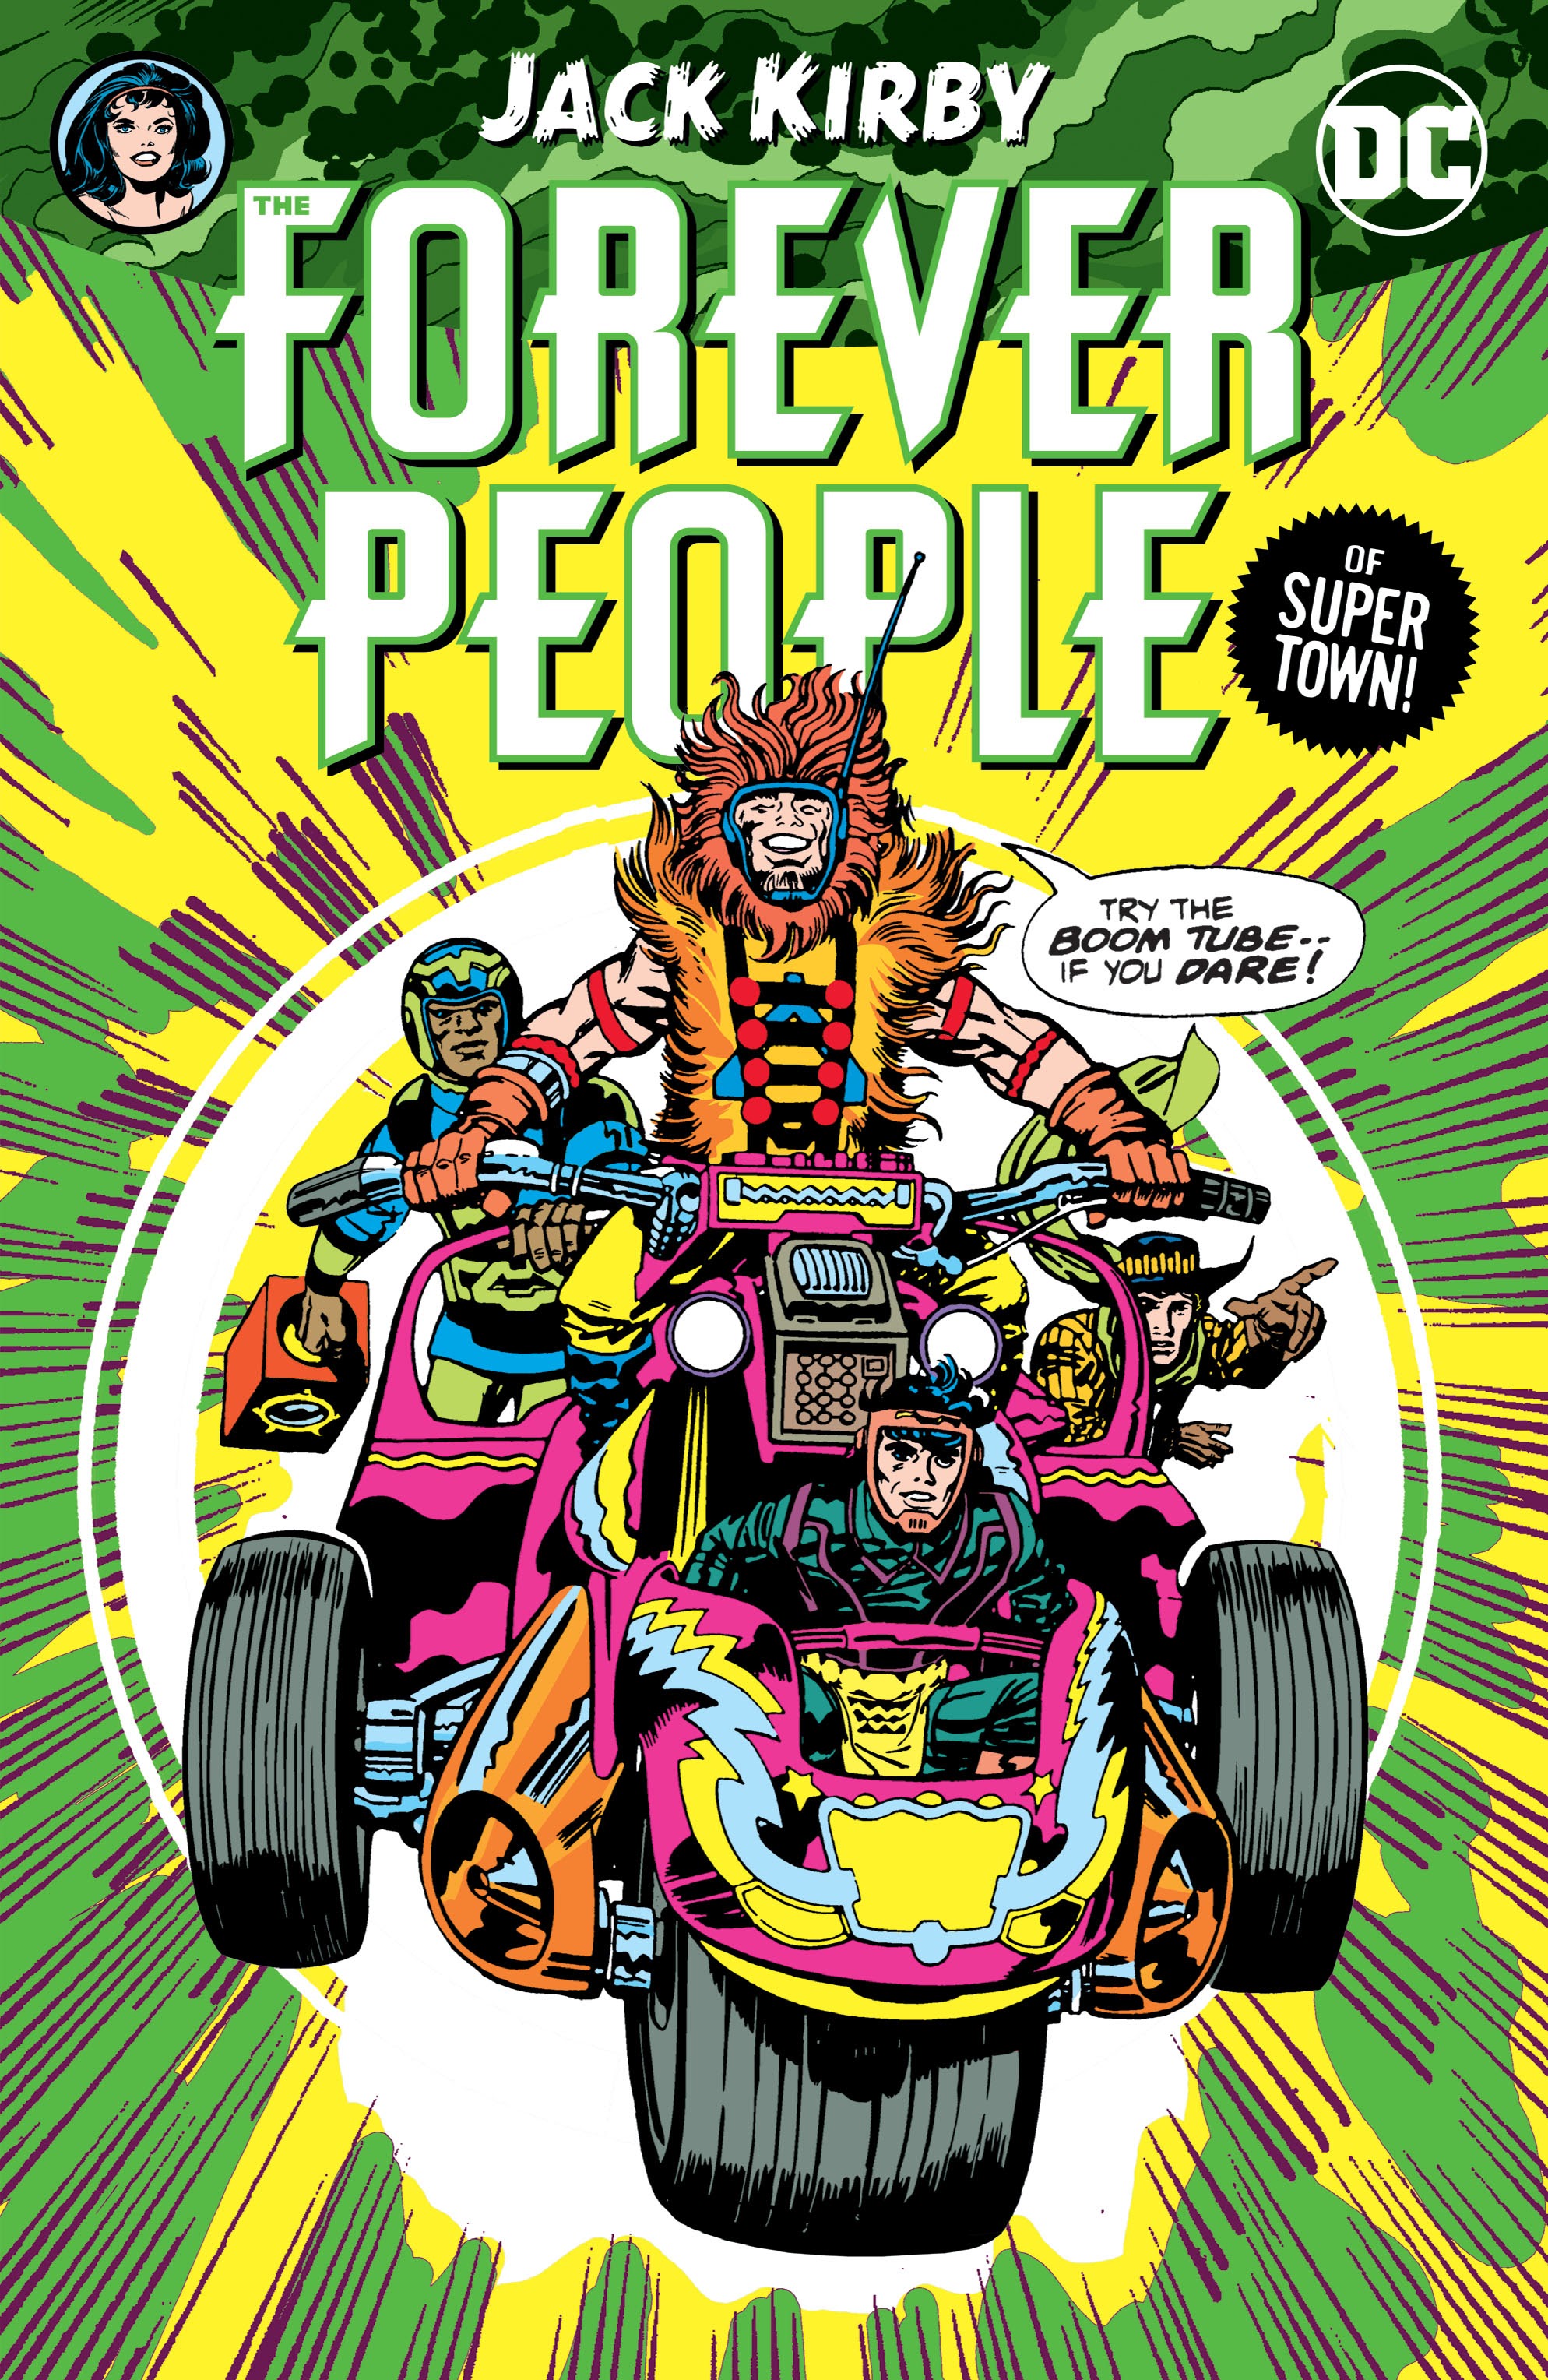 Read online The Forever People comic -  Issue # _TPB  by Jack Kirby (Part 1) - 1